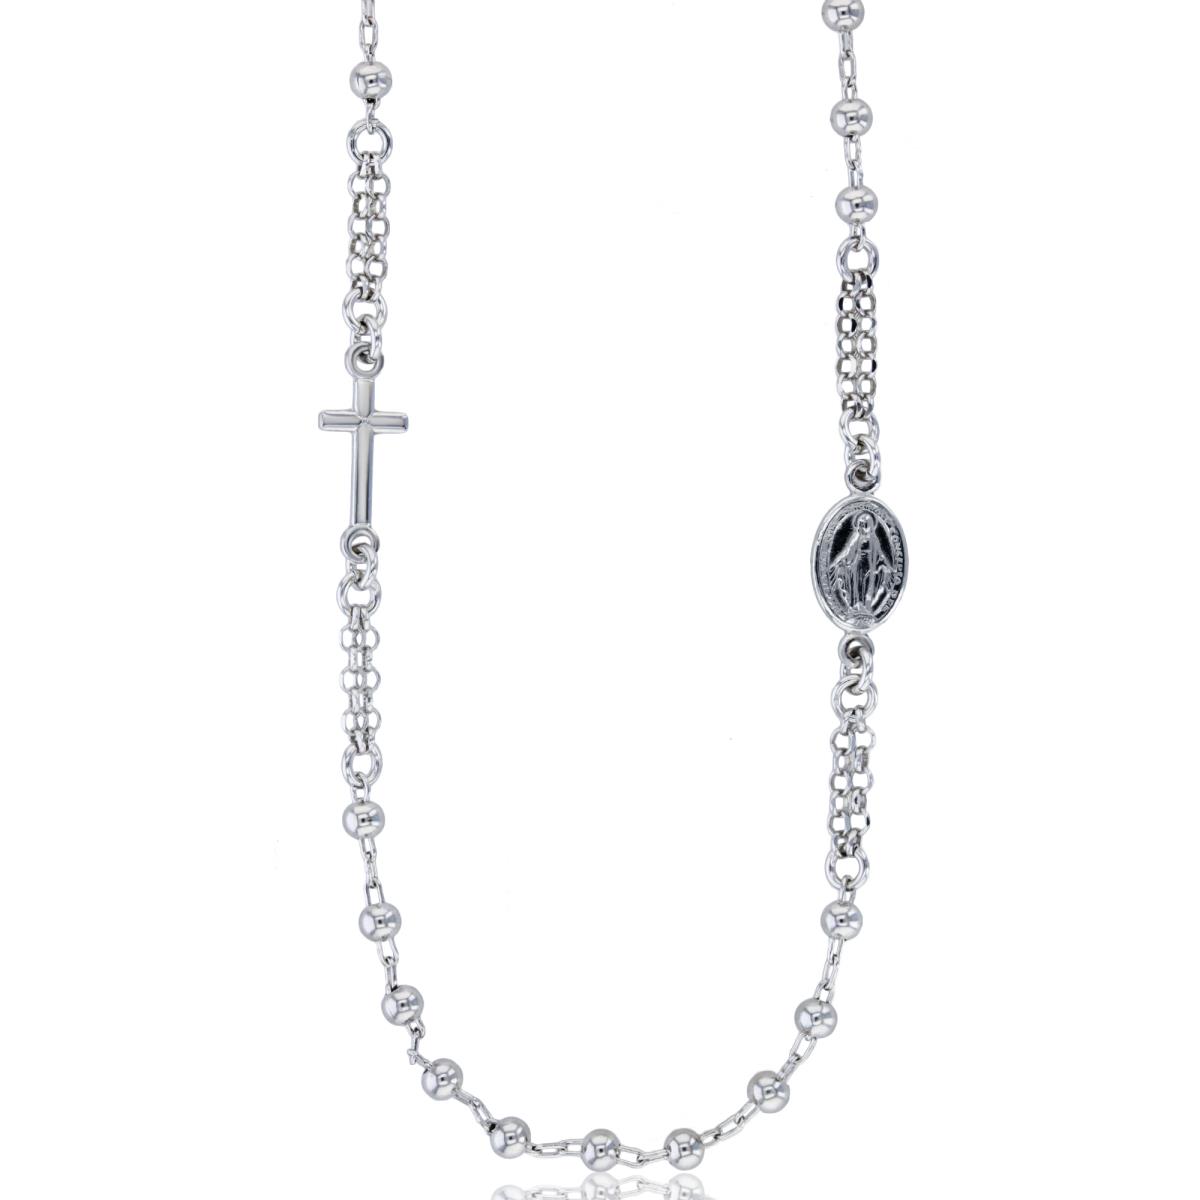 Sterling Silver Rhodium 3mm Beads Cross & Virgin Mary 20" Rosary Necklace